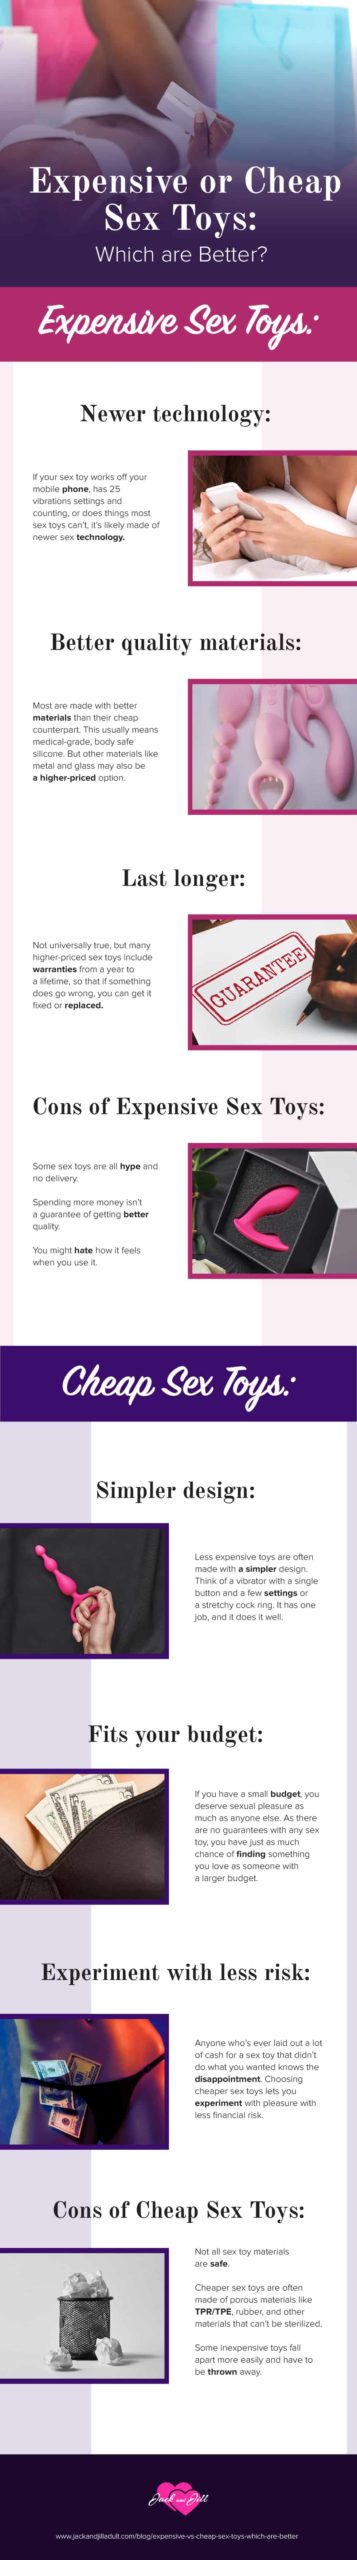 Infographic for Expensive vs. Cheap Sex Toys: Which are Better?